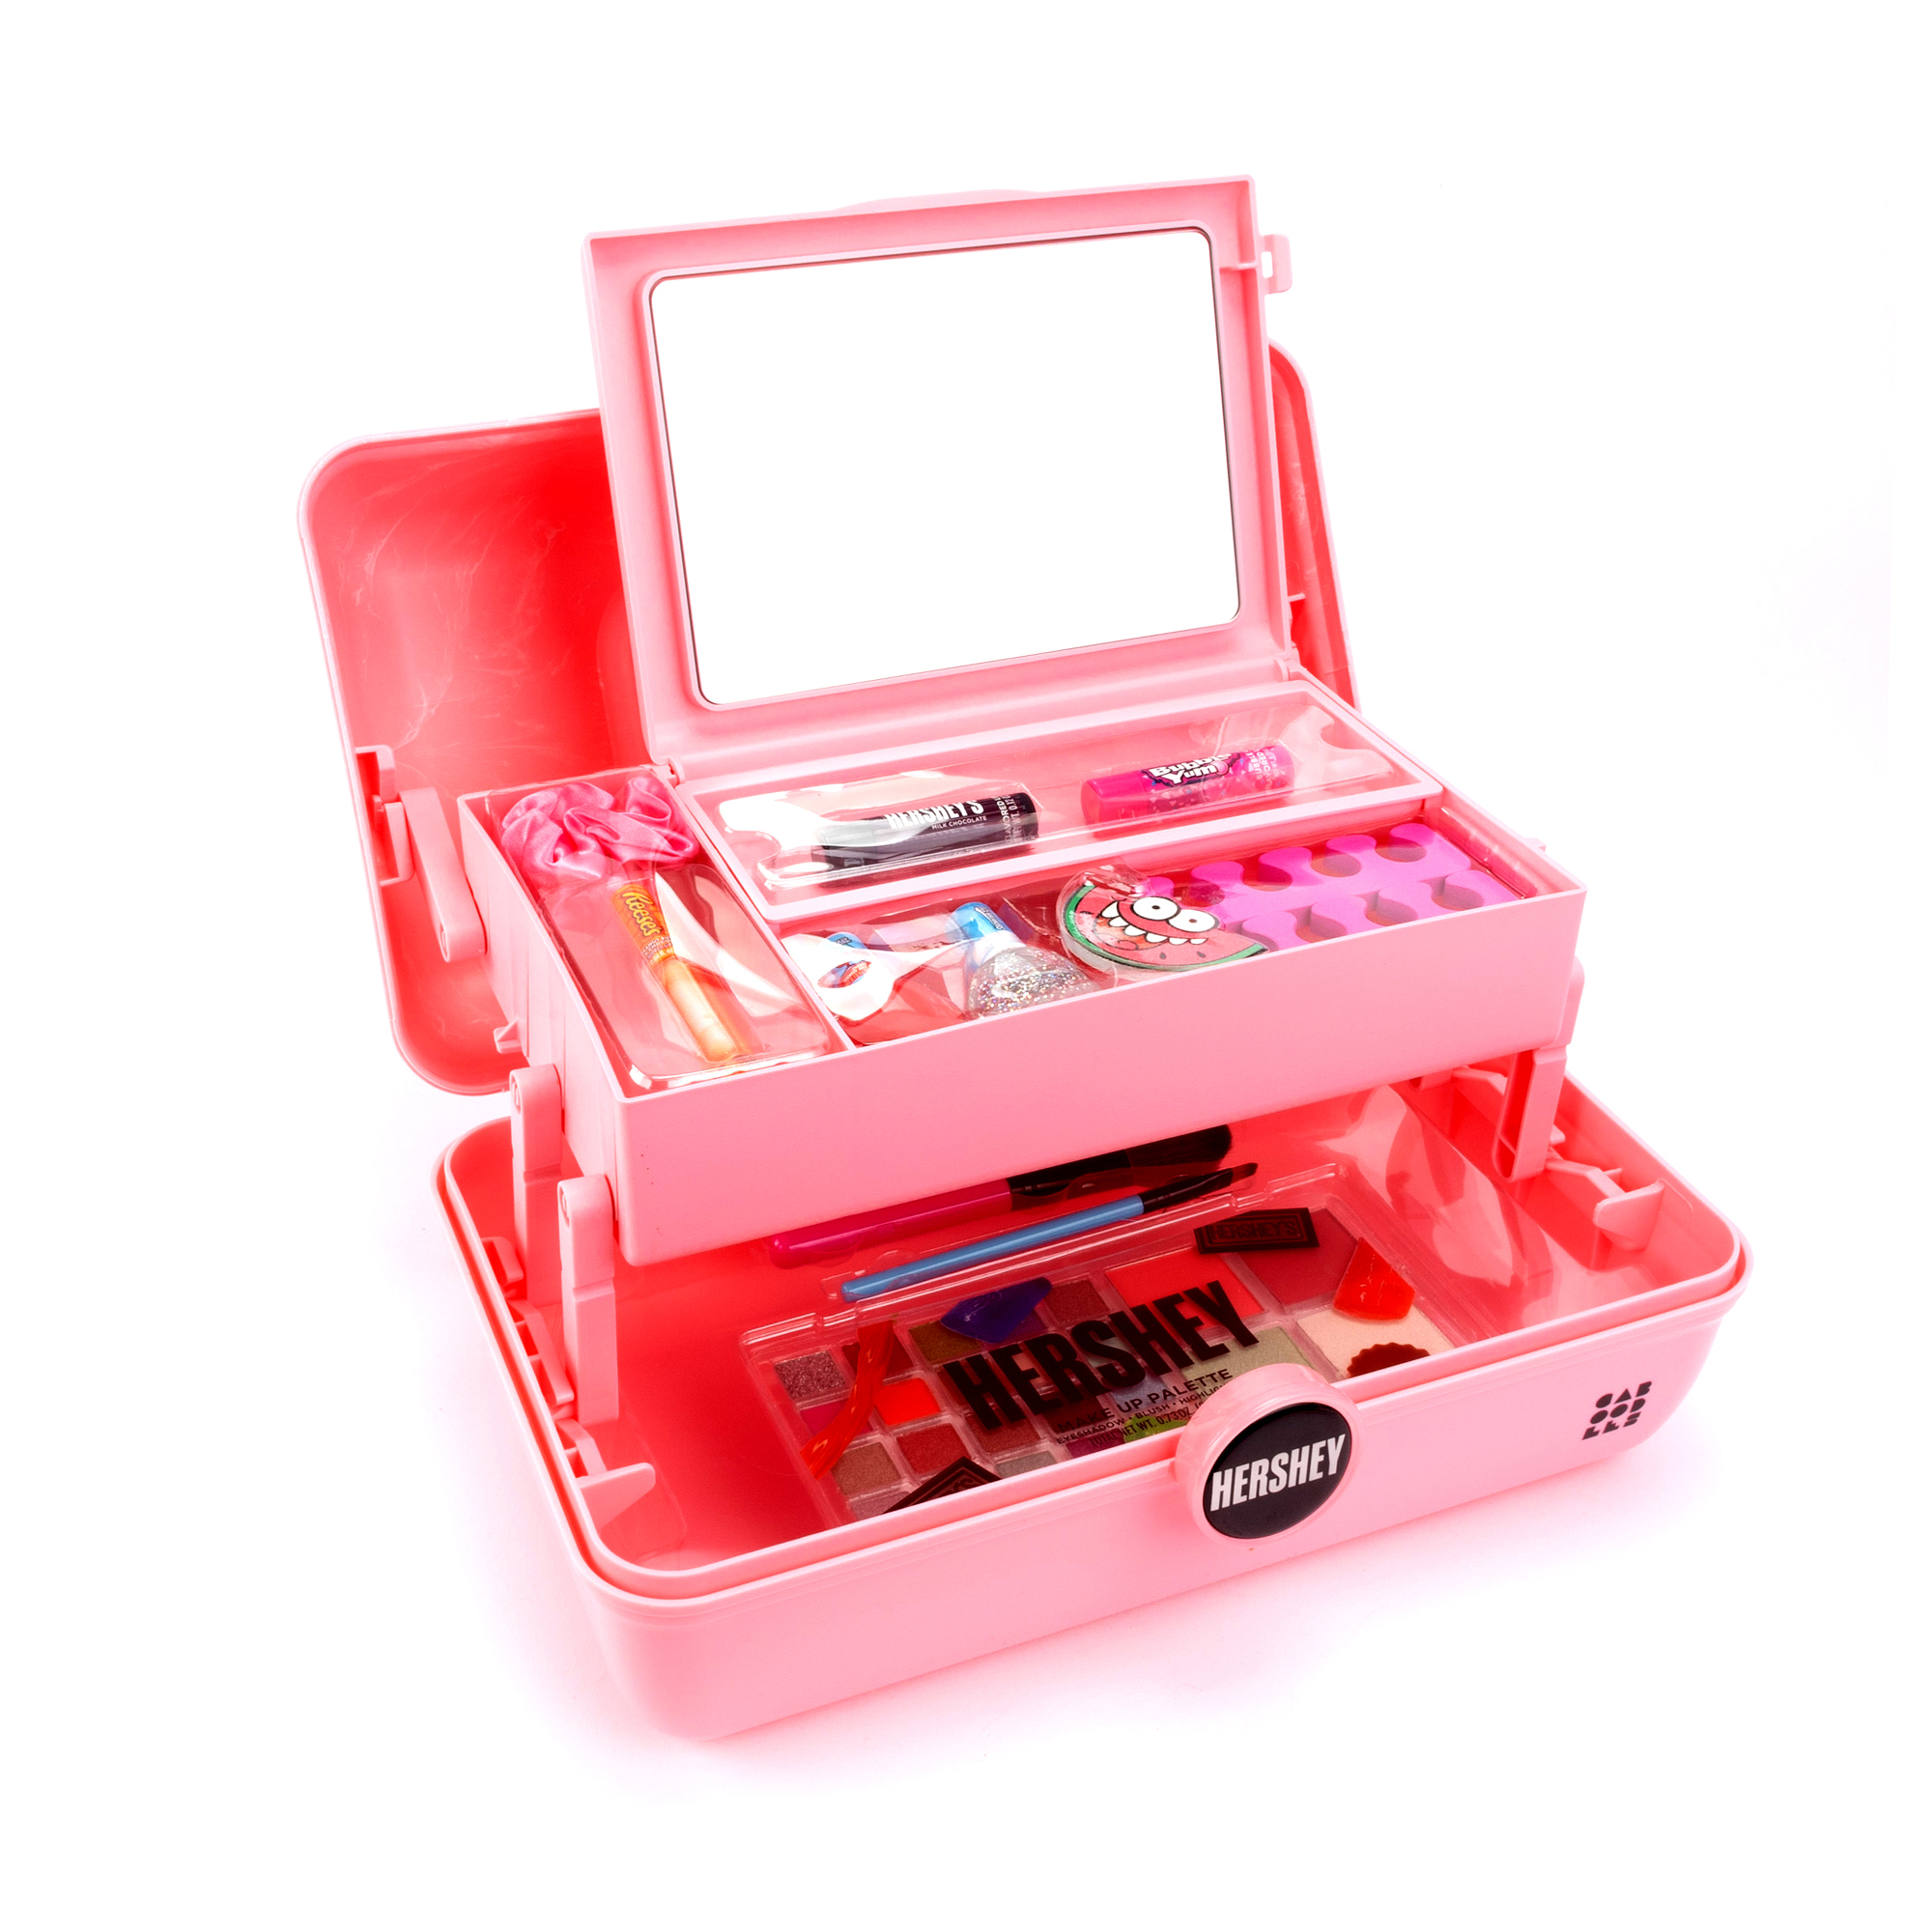 Caboodles x Taste Beauty x Hershey's On The Go Girl Cosmetic case with 13 piece cosmetic set - image 1 of 6